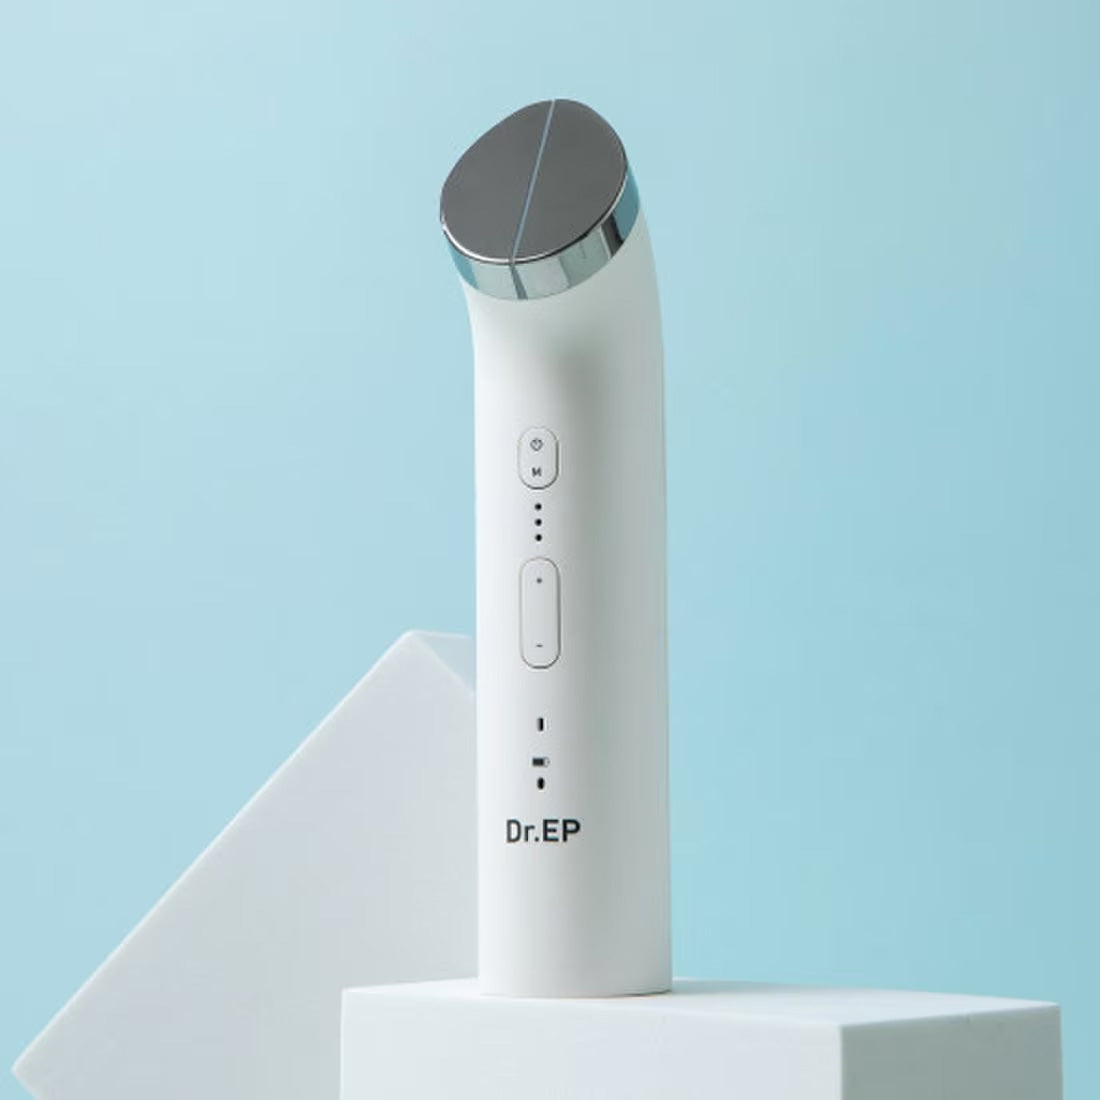 Dr.LeE Dr.EP Beauty Device Booster Lifting Electroporation Drep-v2: A cutting-edge beauty device for lifting and enhancing skin through electroporation.